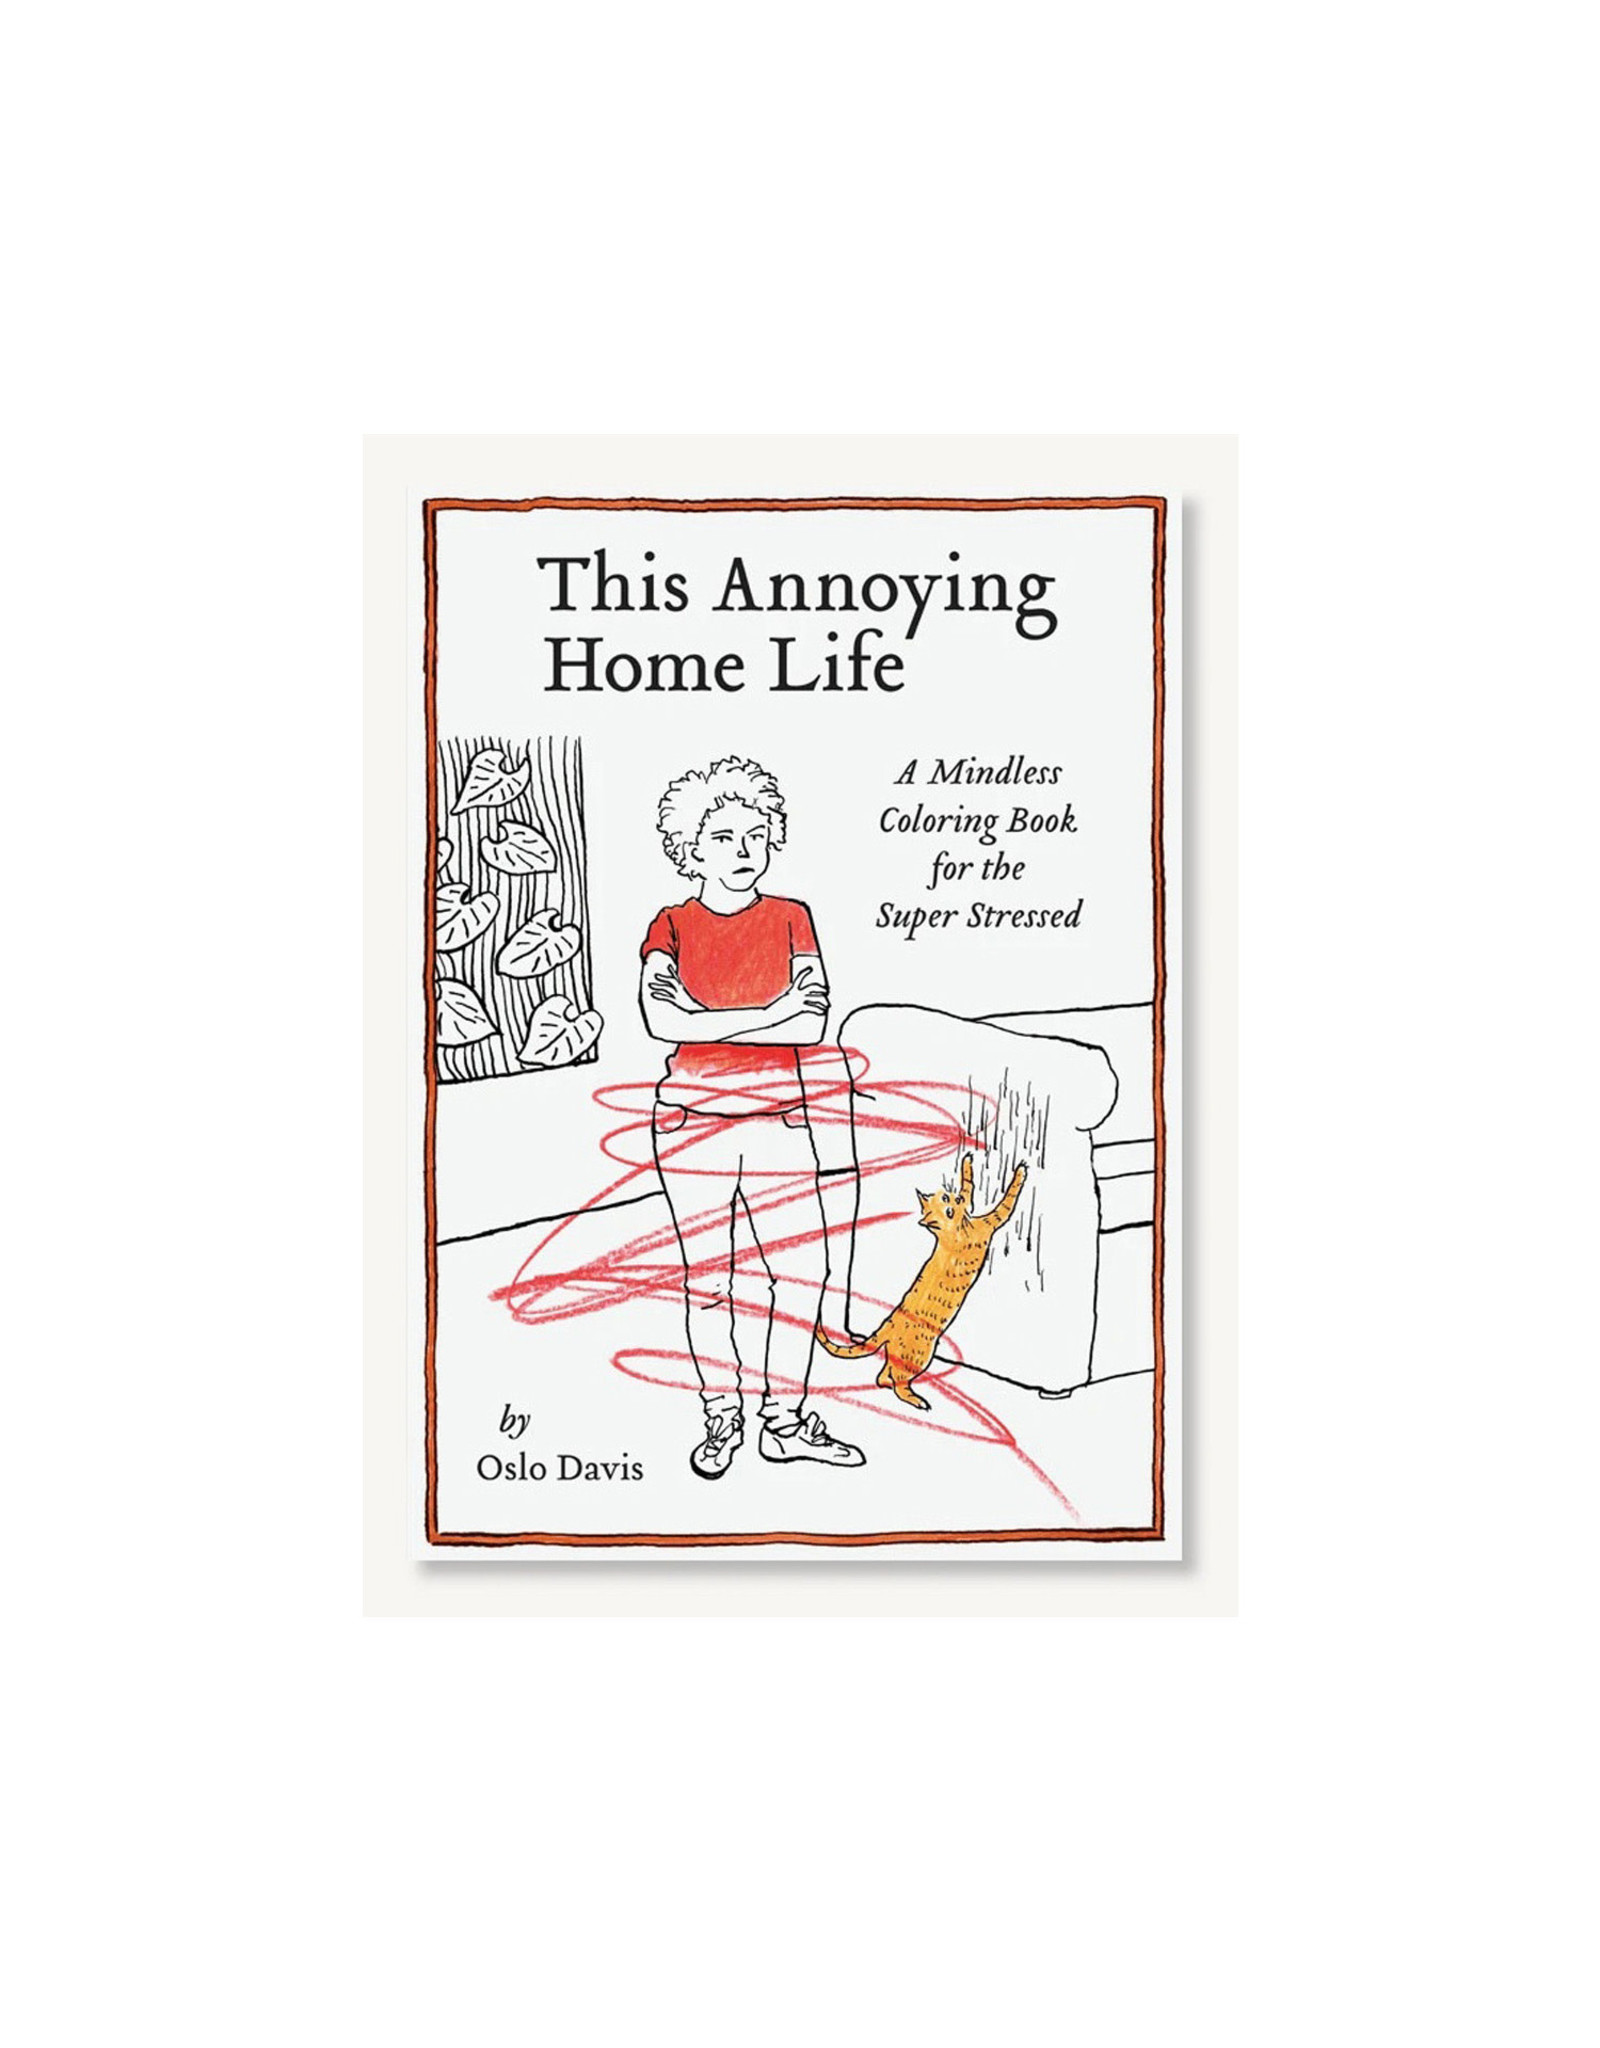 This Annoying Home Life: A Mindless Coloring Book for the Super Stressed